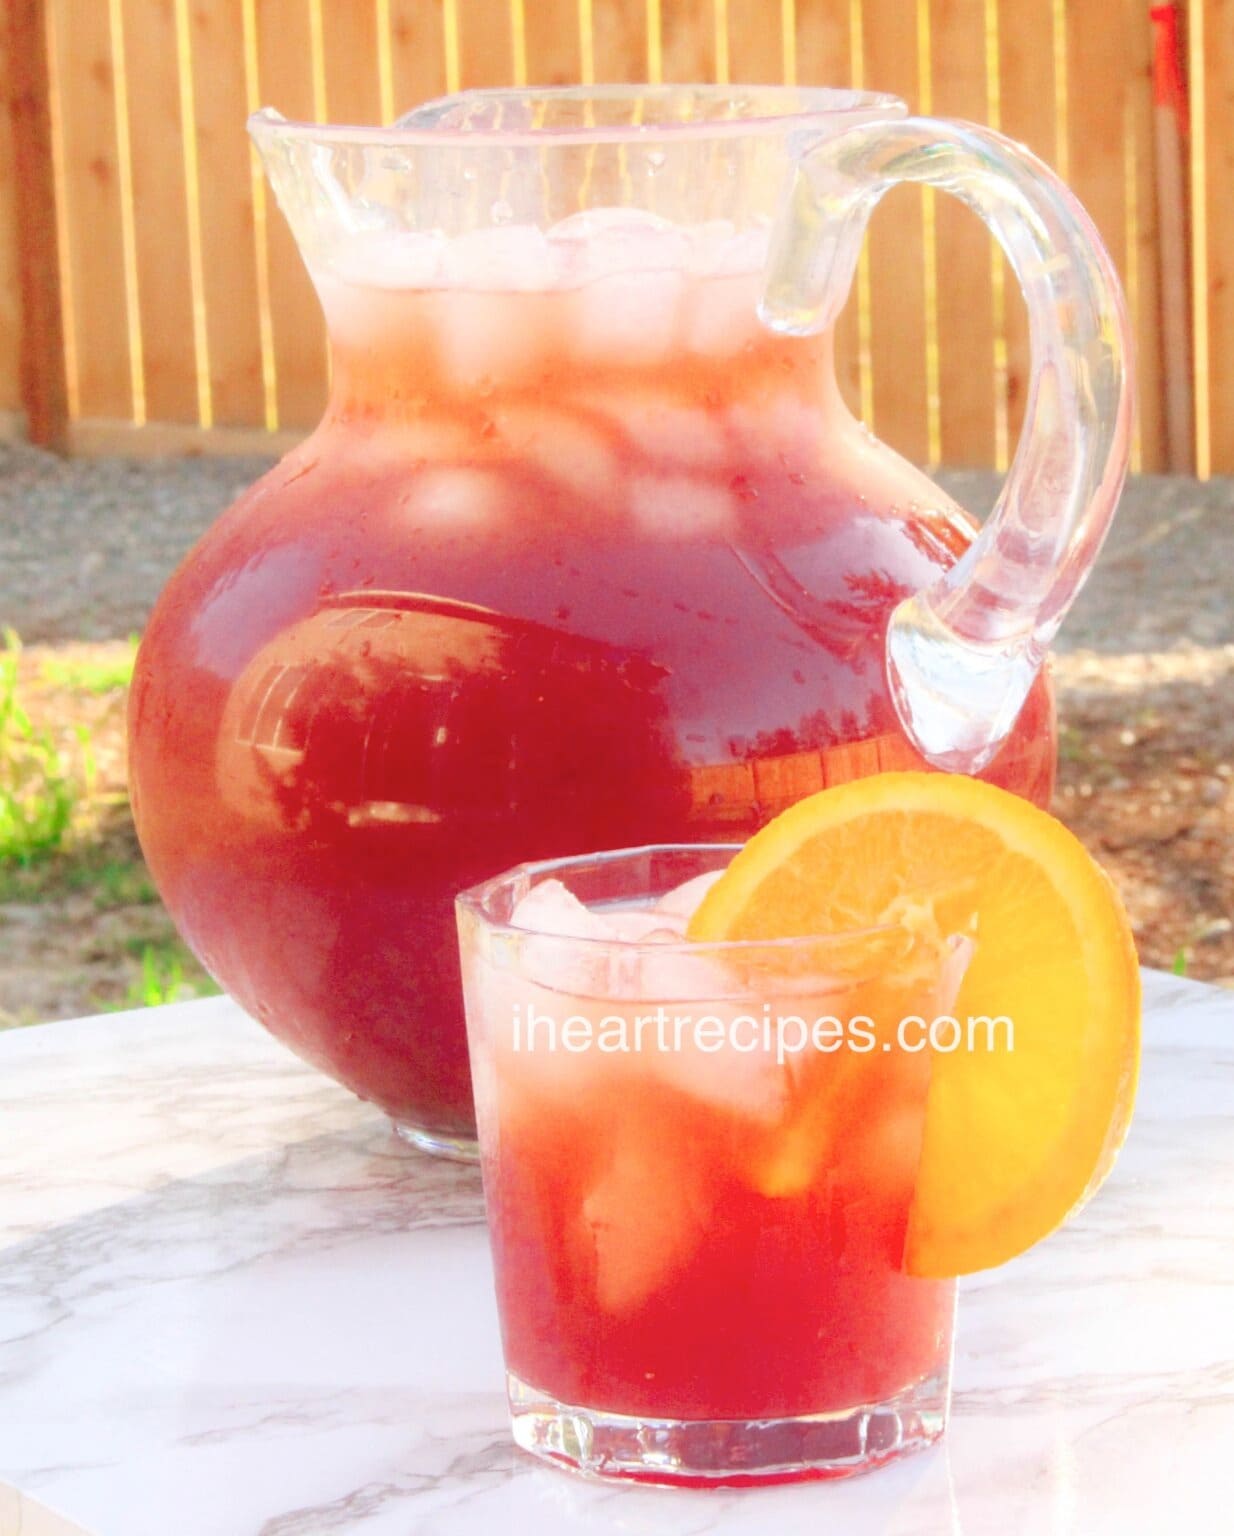 A pitcher and a glass of Fruit Punch with lemon wheel